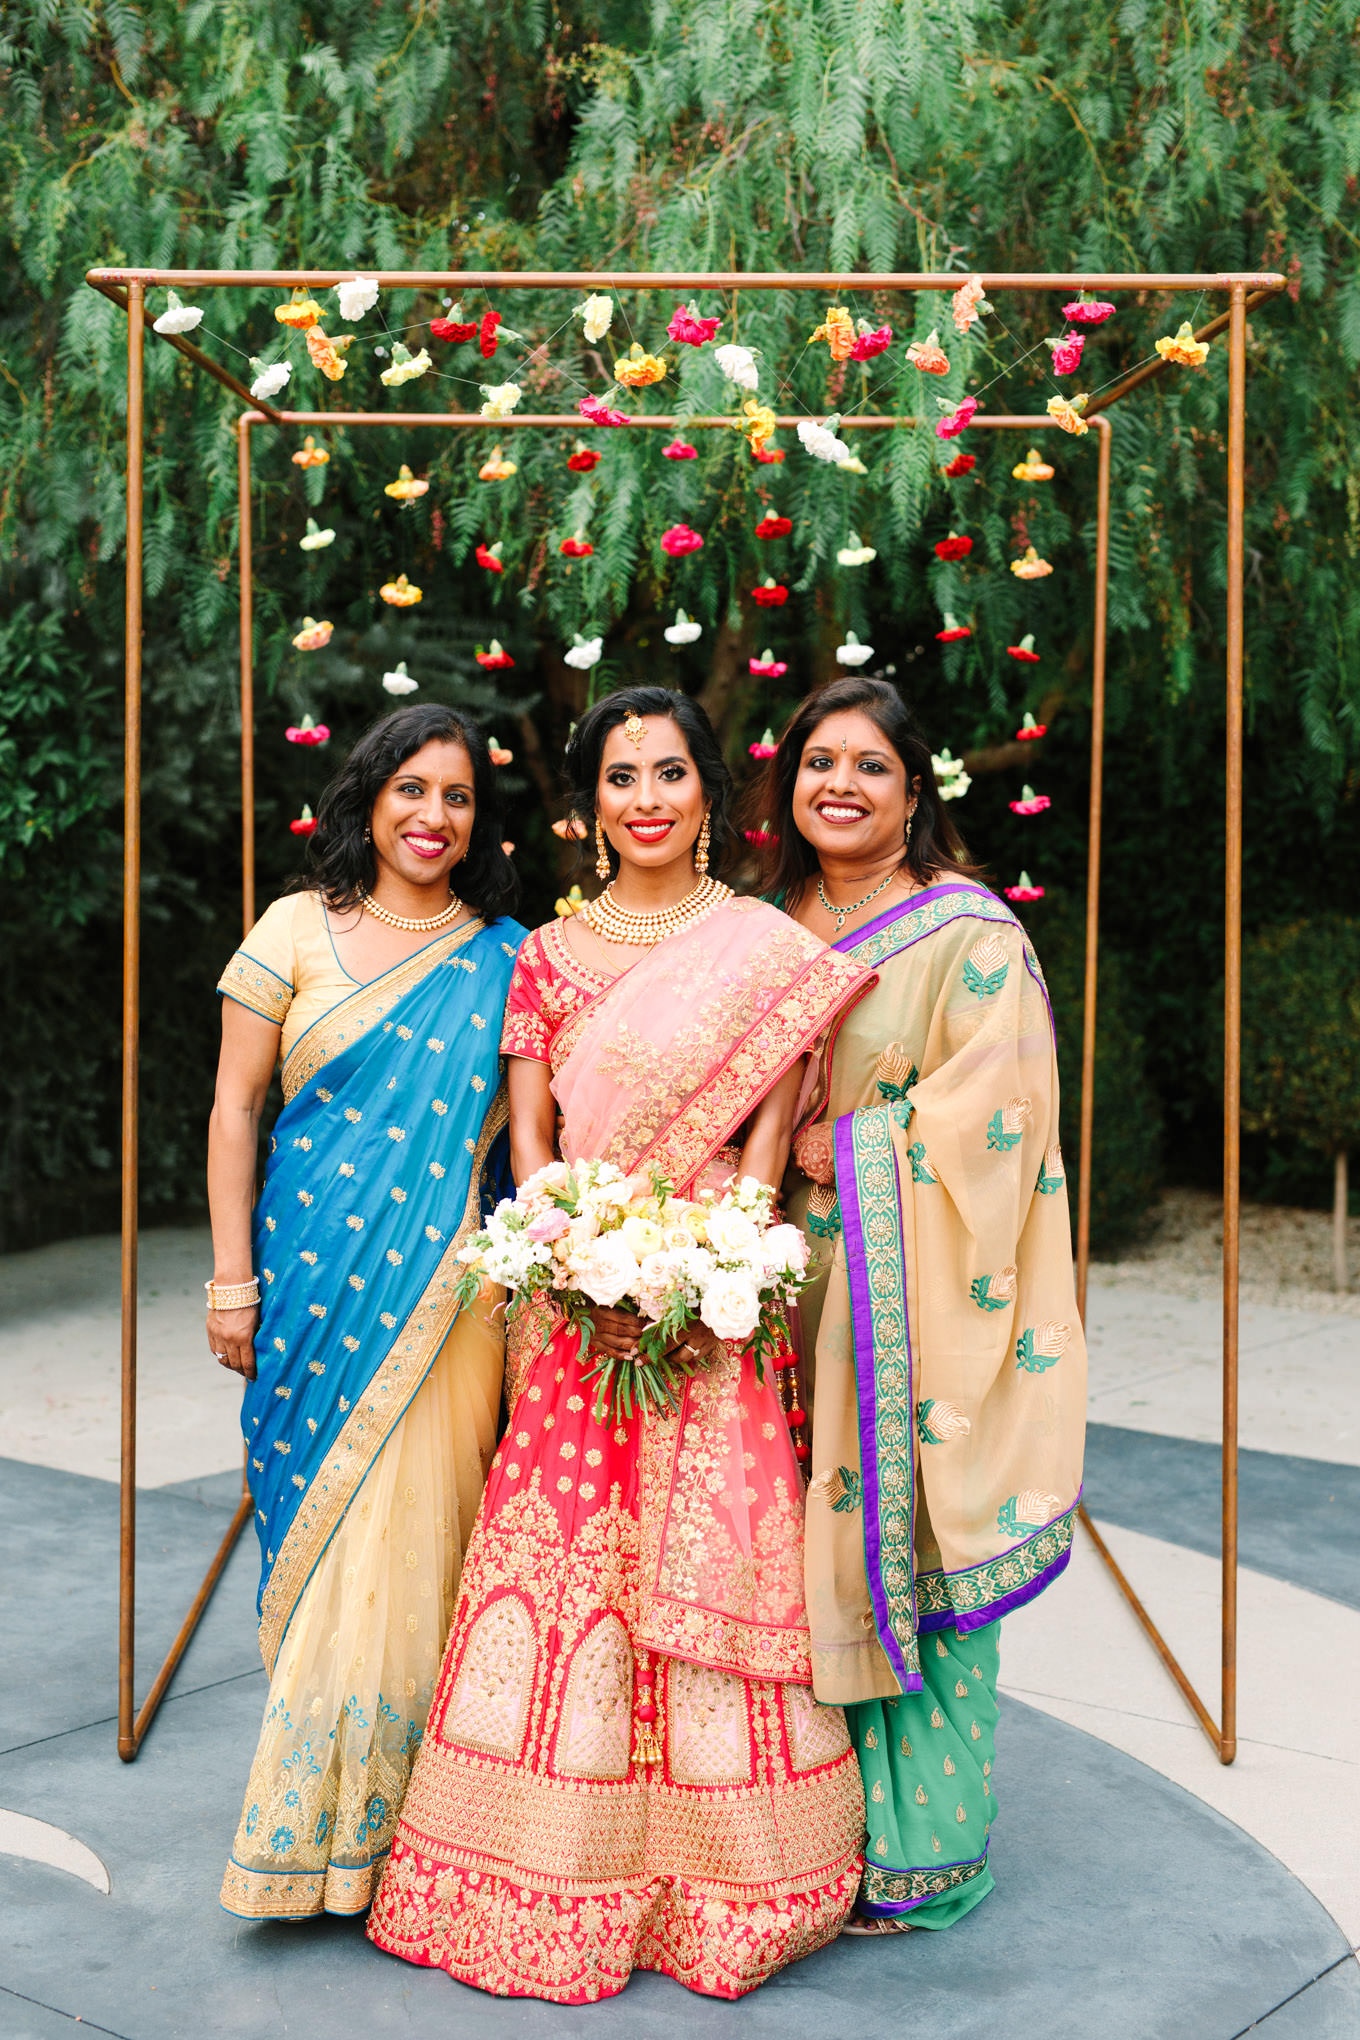 Bride and sisters in colorful saree gowns. Two Disney artists create a unique and colorful Indian Fusion wedding at The Fig House Los Angeles, featured on Green Wedding Shoes. | Colorful and elevated wedding inspiration for fun-loving couples in Southern California | #indianwedding #indianfusionwedding #thefighouse #losangeleswedding   Source: Mary Costa Photography | Los Angeles